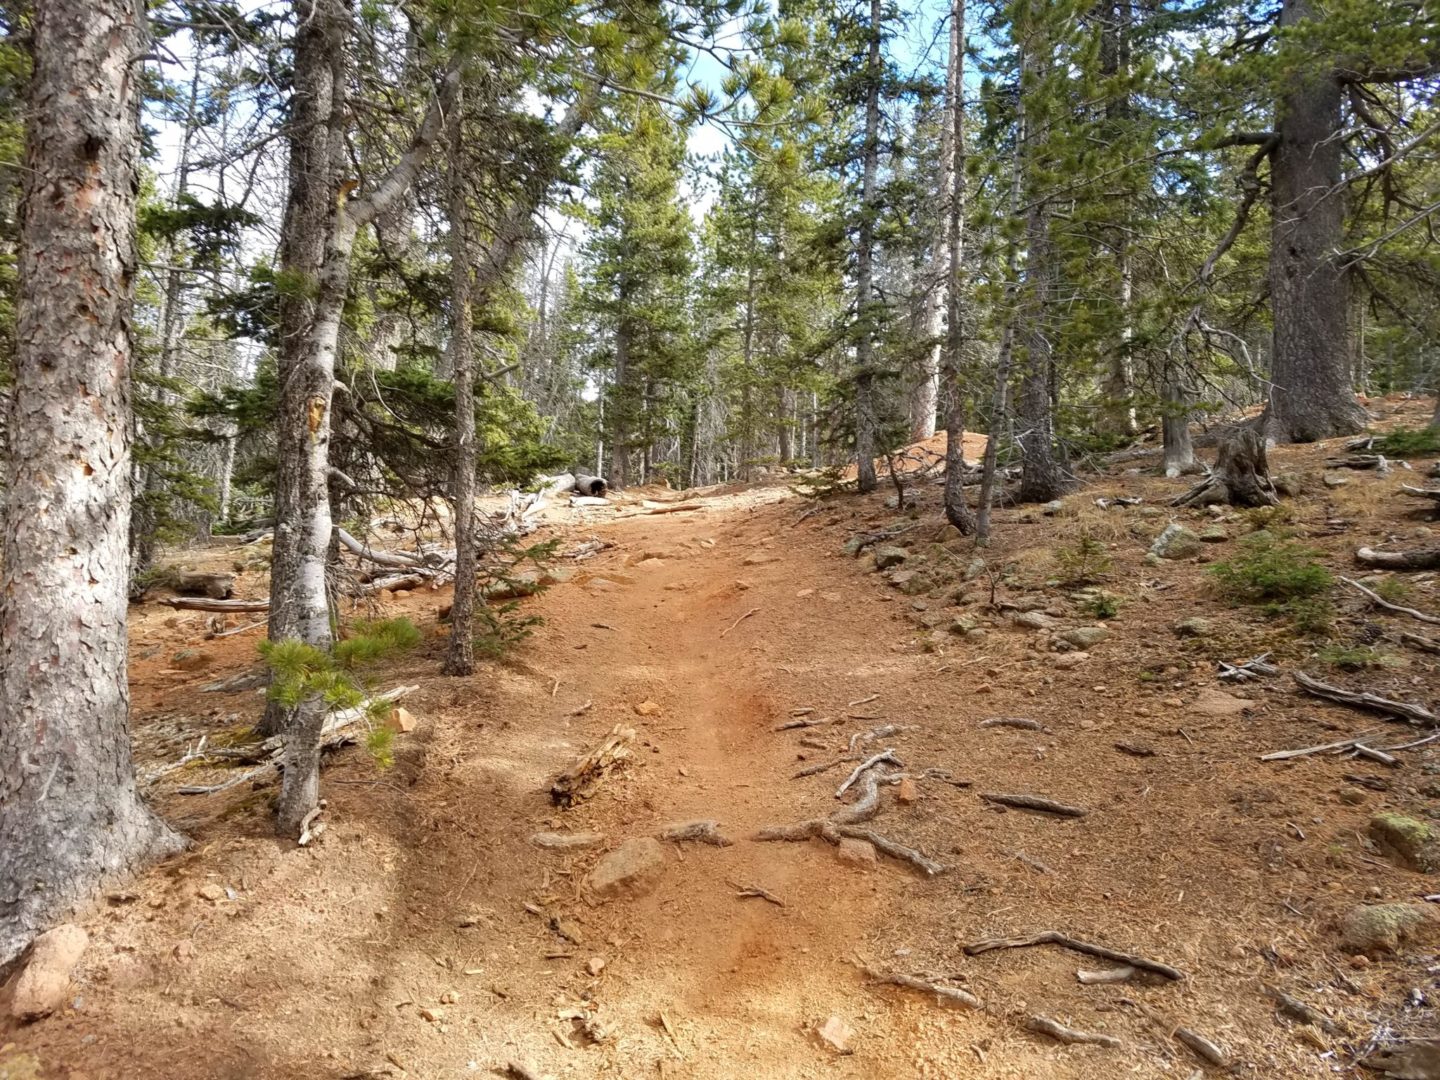 Trail leading out of the valley